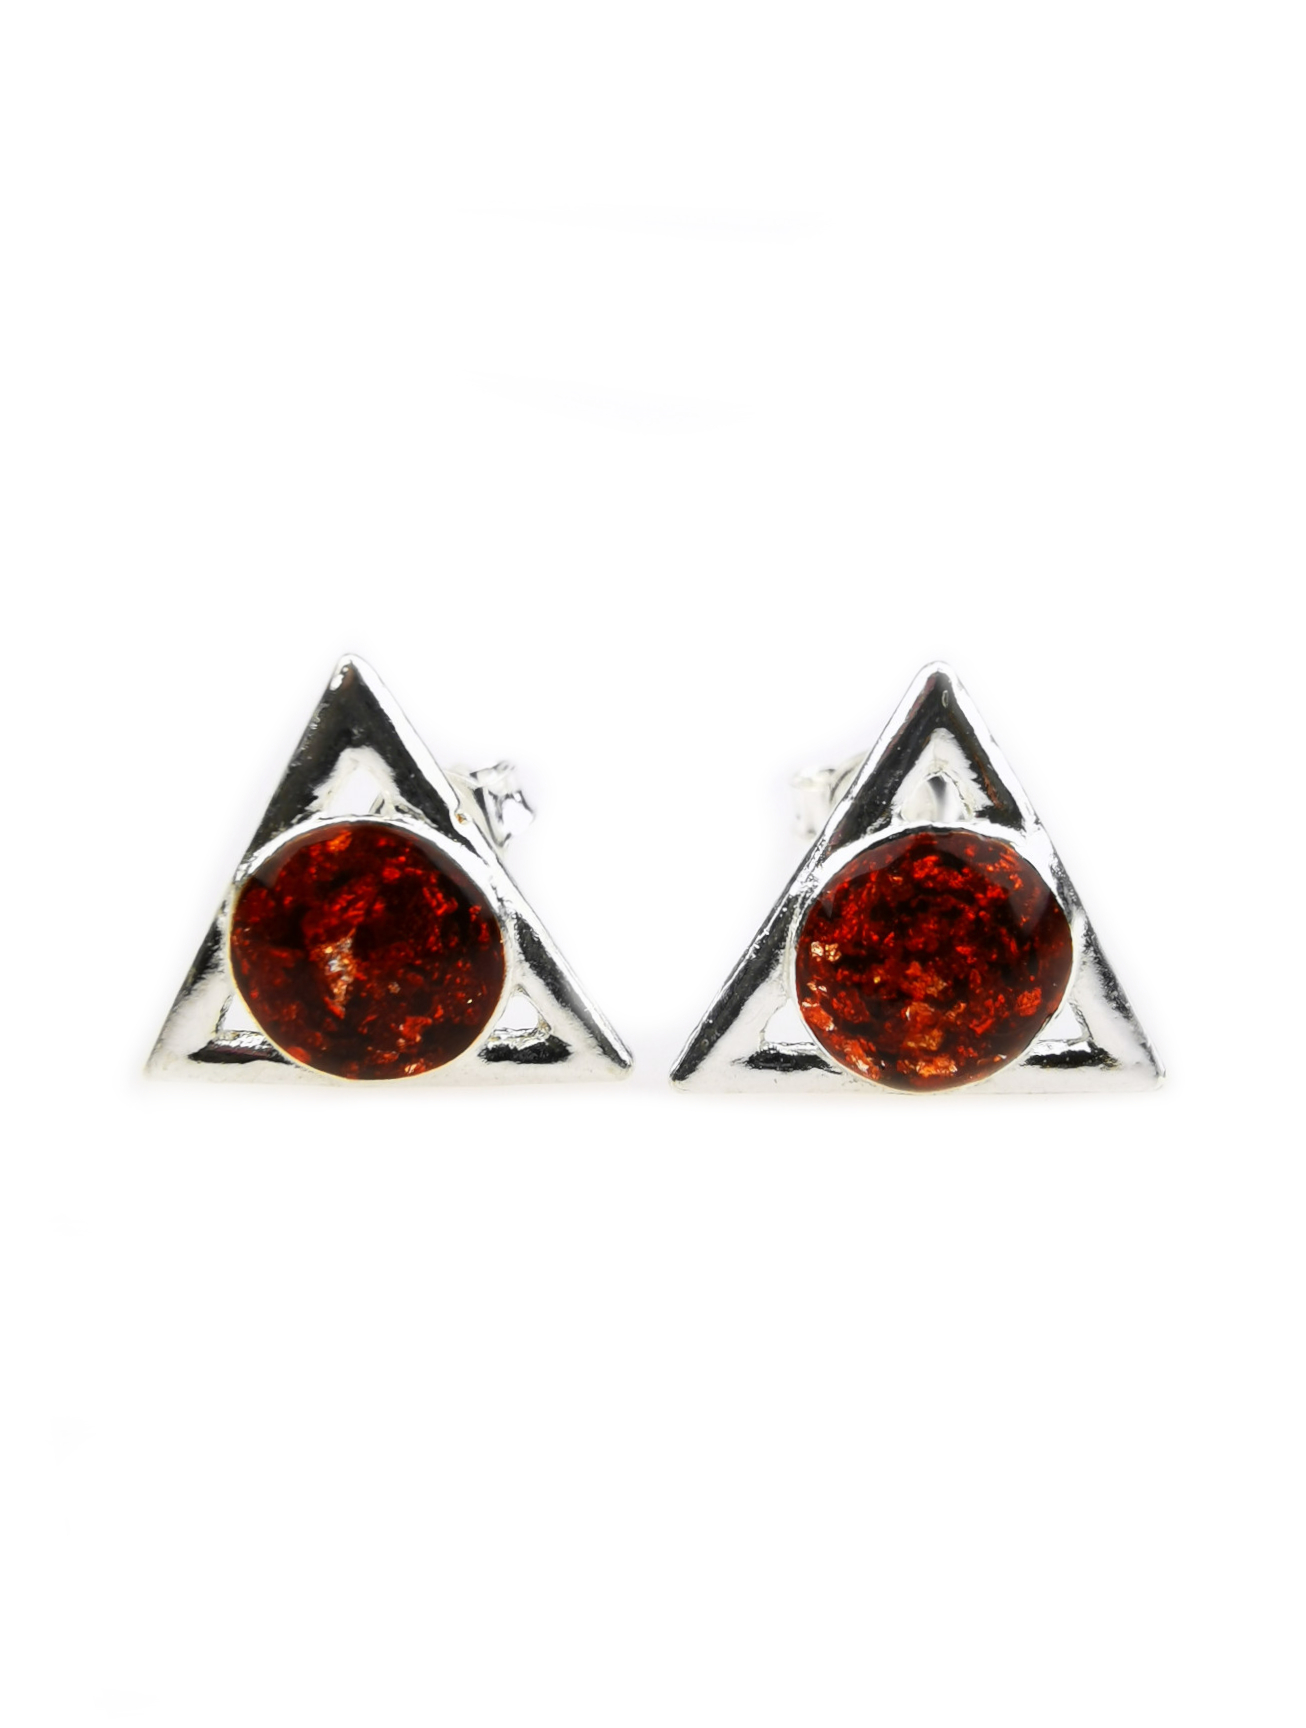 Brown Triangle Orgone Crystal Earrings by OrgoneVibes